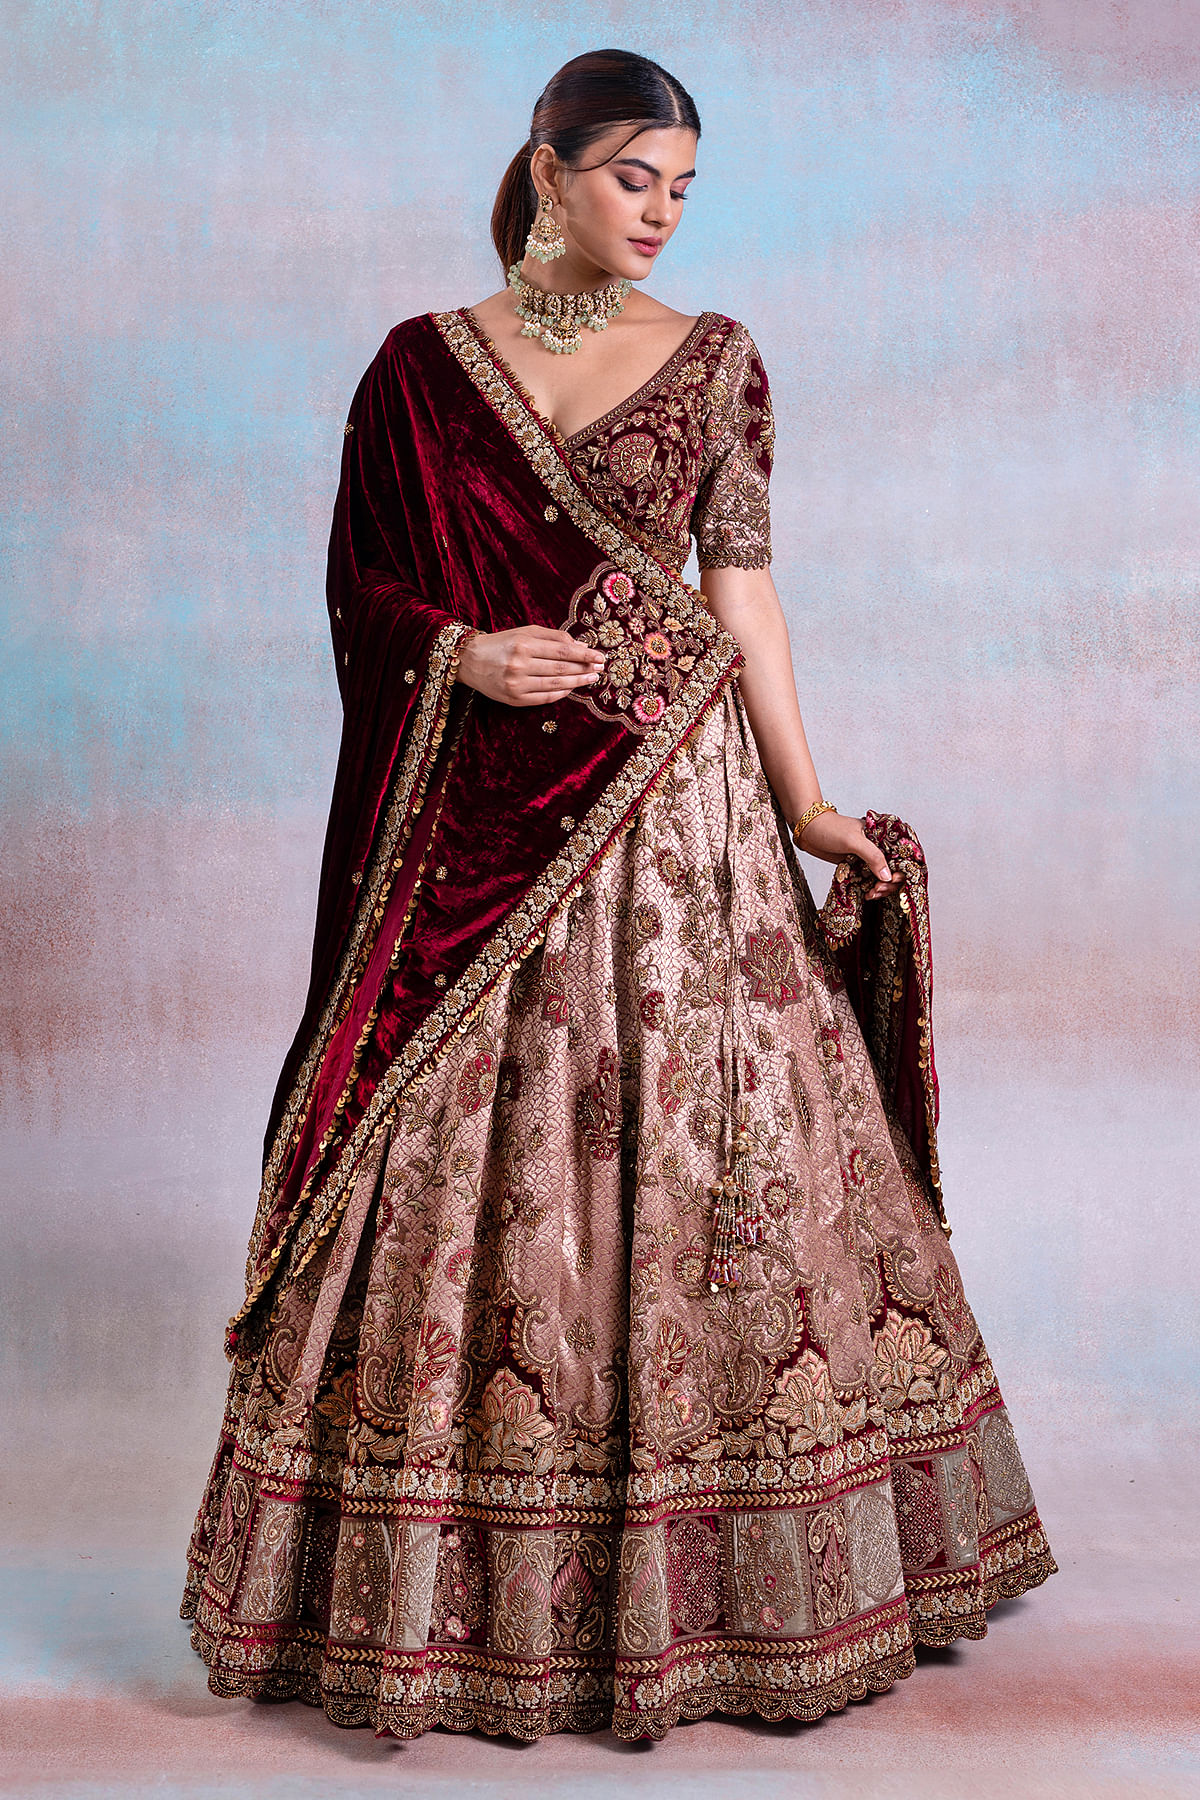 Deep Maroon Bridal Lehenga With Hand Emroidered Peacock Motifs And Two -  Shop Sunny's Bridal